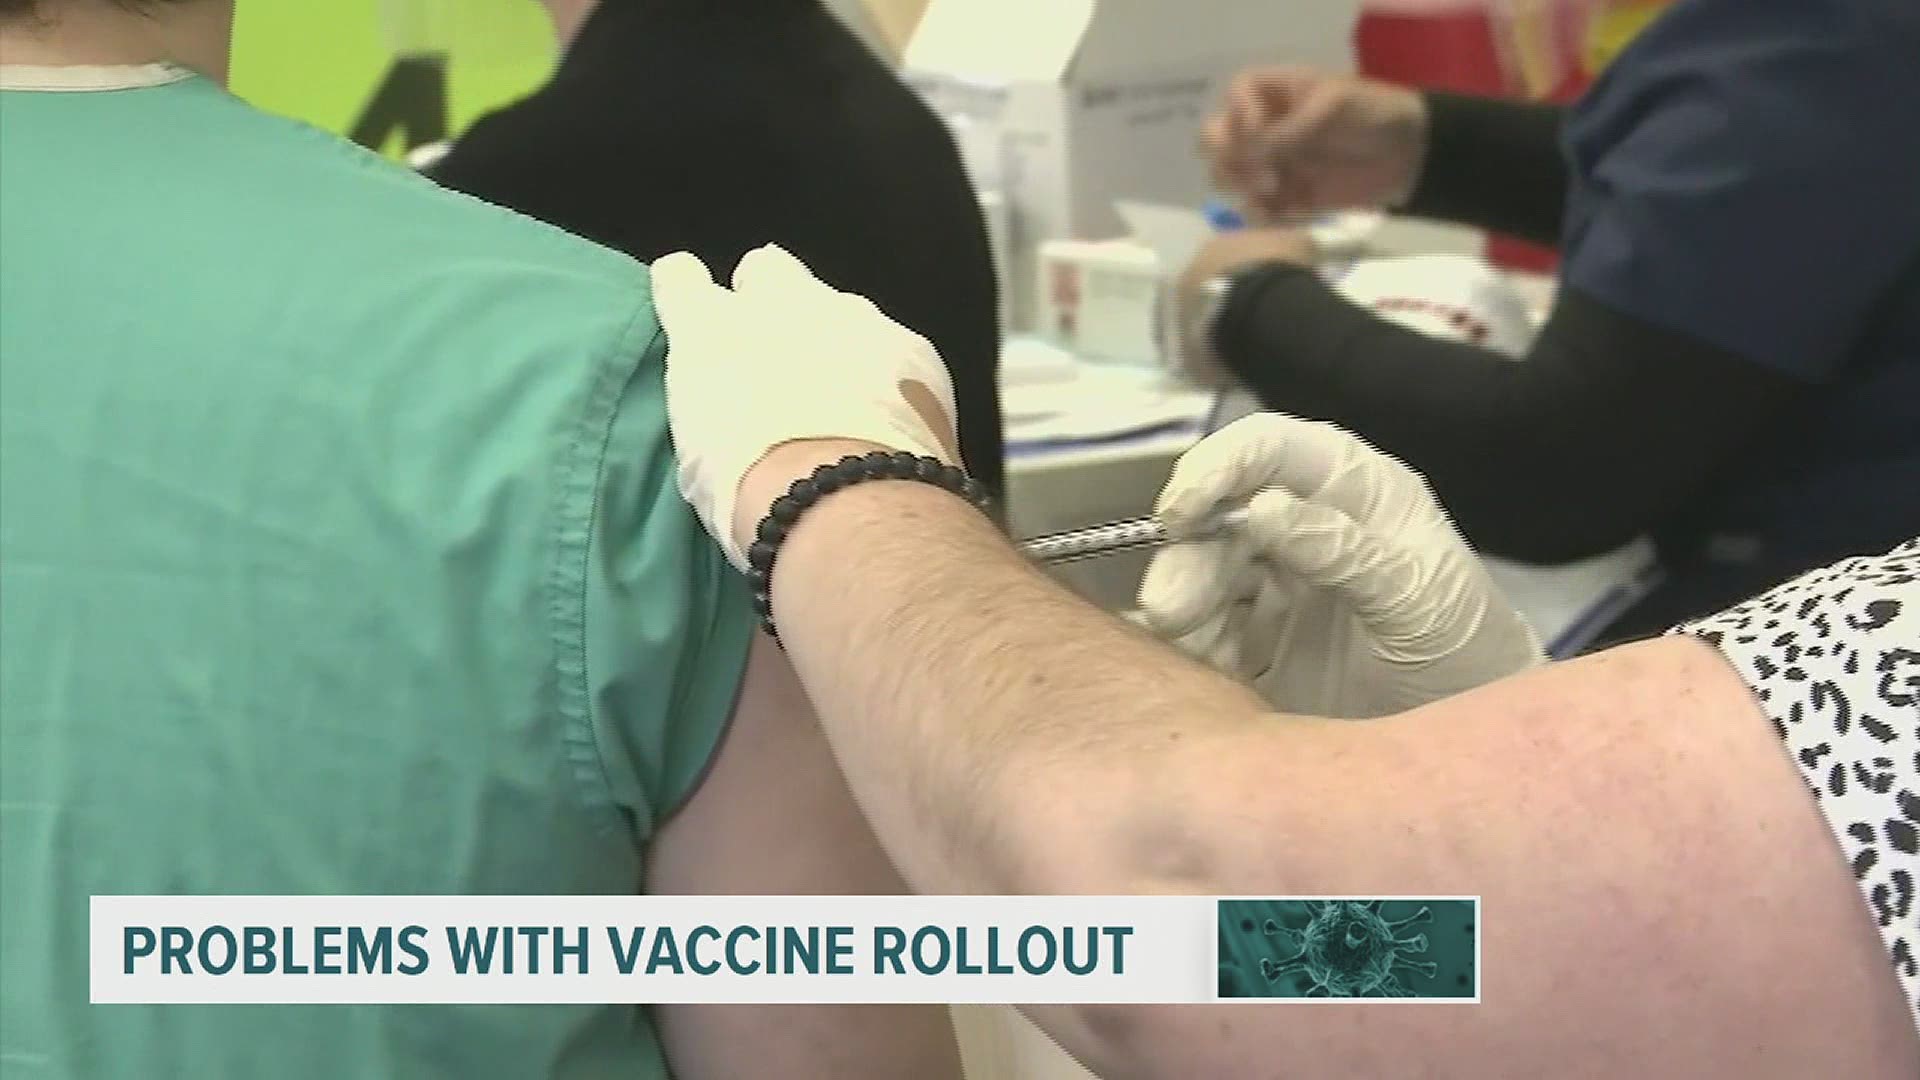 PA Secretary of Health Dr. Rachel Levine admits the federal vaccination rollout has missed its goal for the end of 2020. But, she said it is improving in 2021.